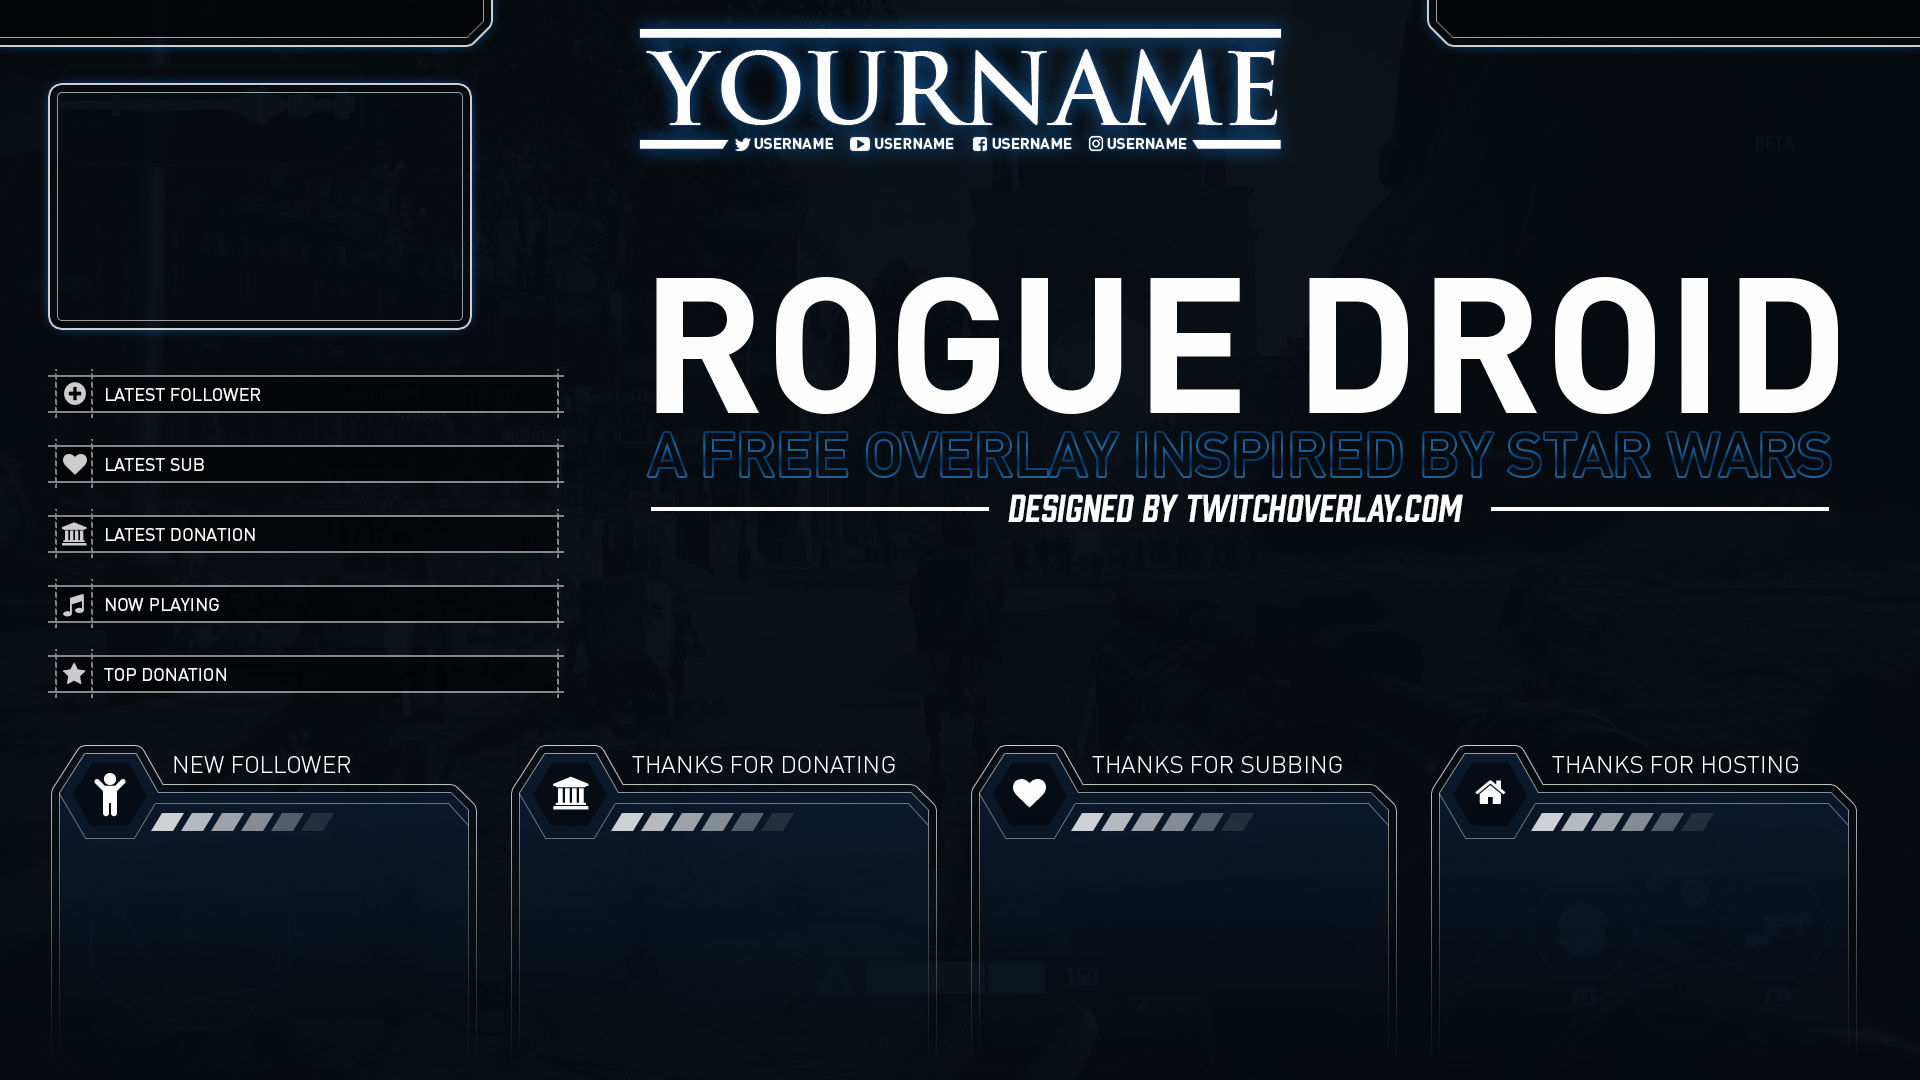 Rogue Droid Free Star Wars Twitch Overlay